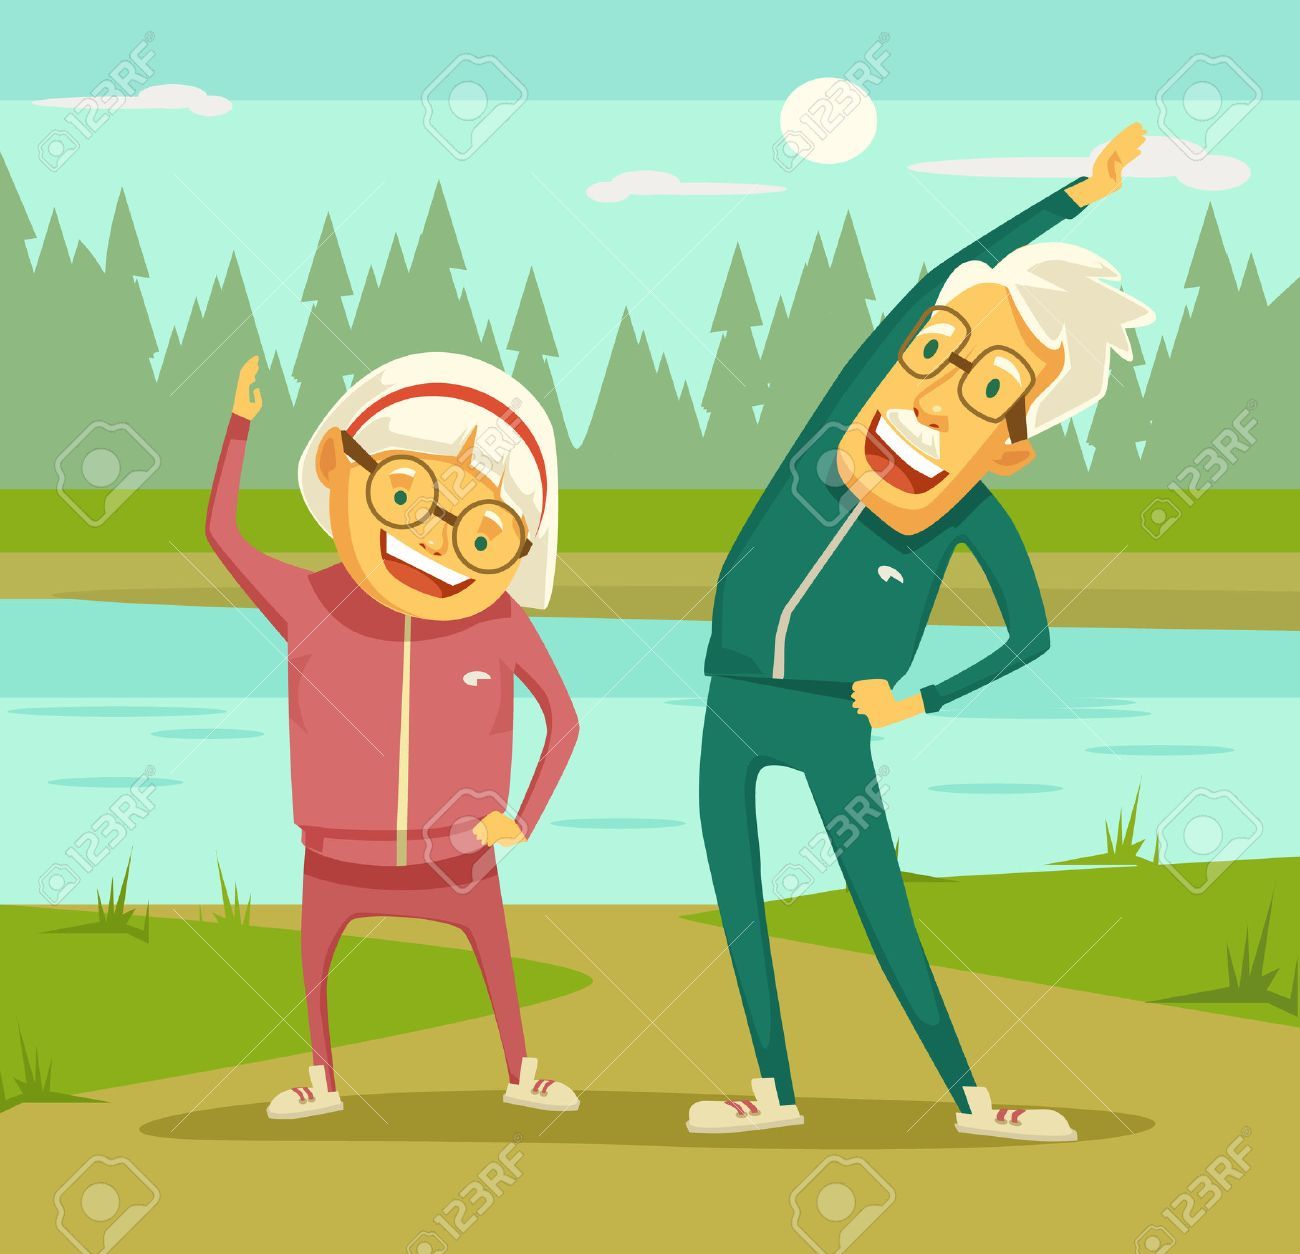 Image result for free. Exercise clipart senior exercise